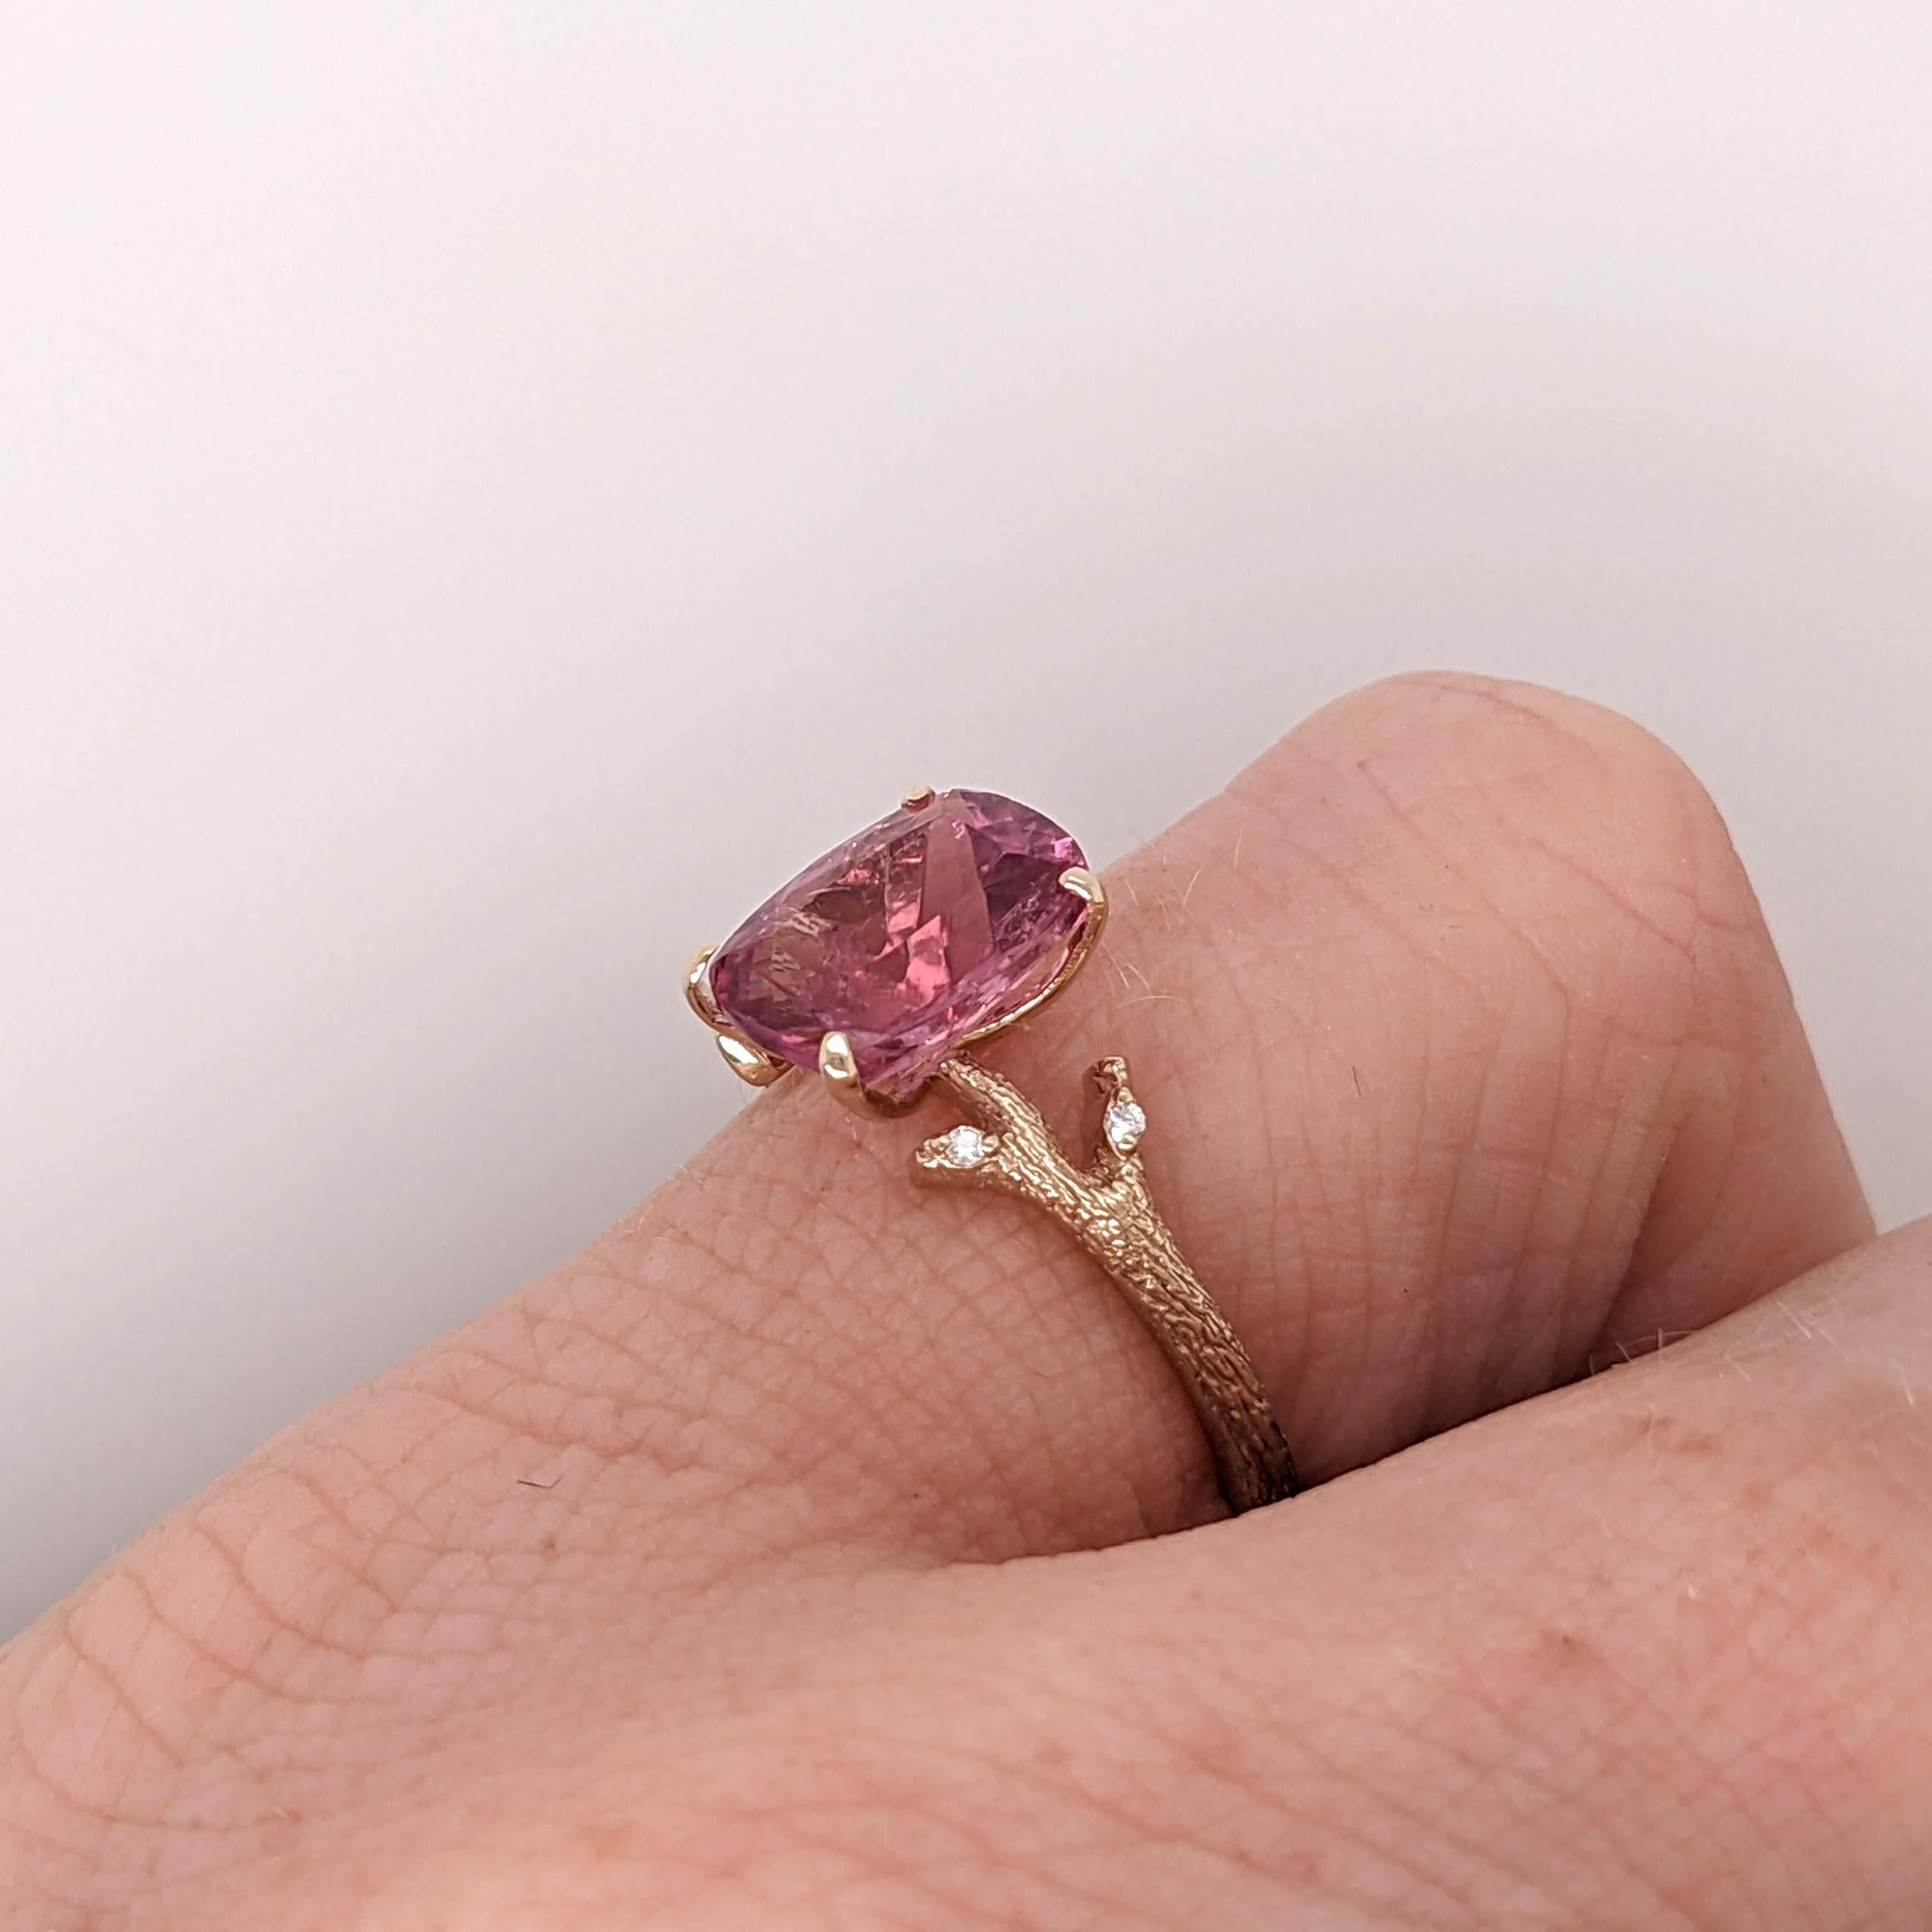 Women's 2ct Pink Tourmaline Ring w Natural Diamonds in Solid 14k Gold Cushion 8.5x7mm